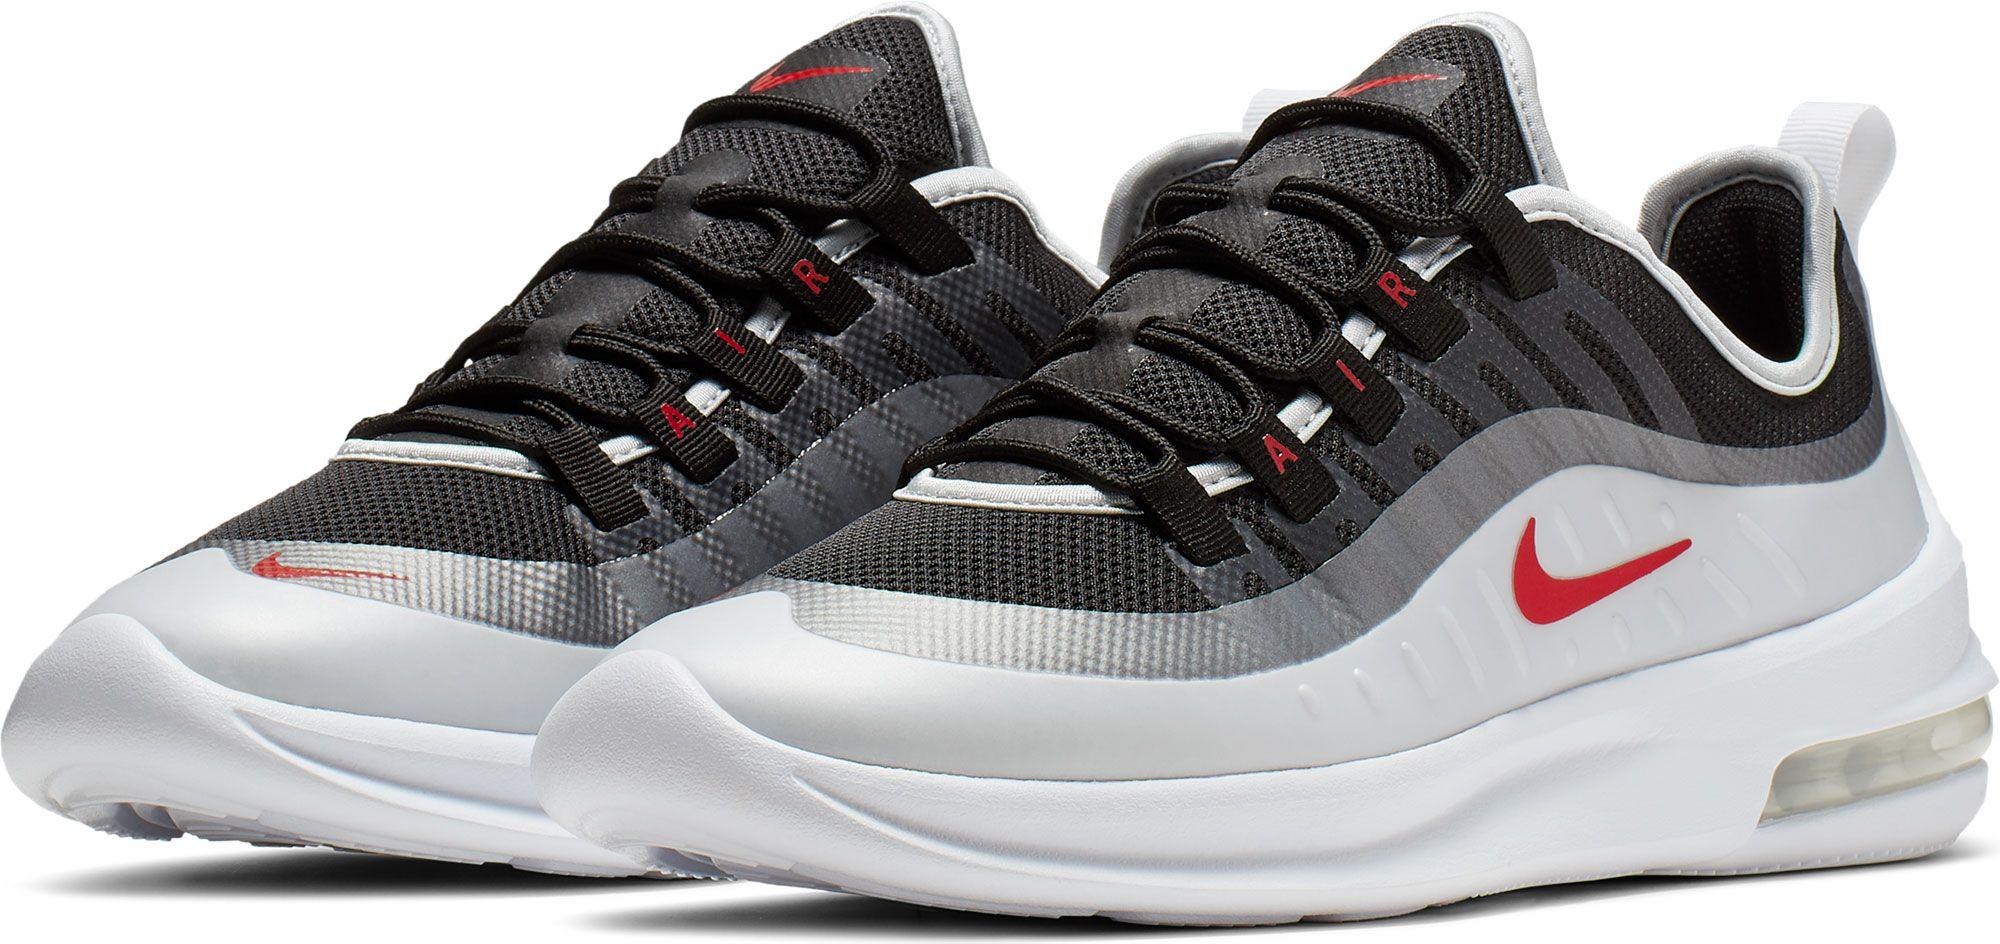 Nike Air Max Axis Shoes in Black/Red (Black) for Men Lyst